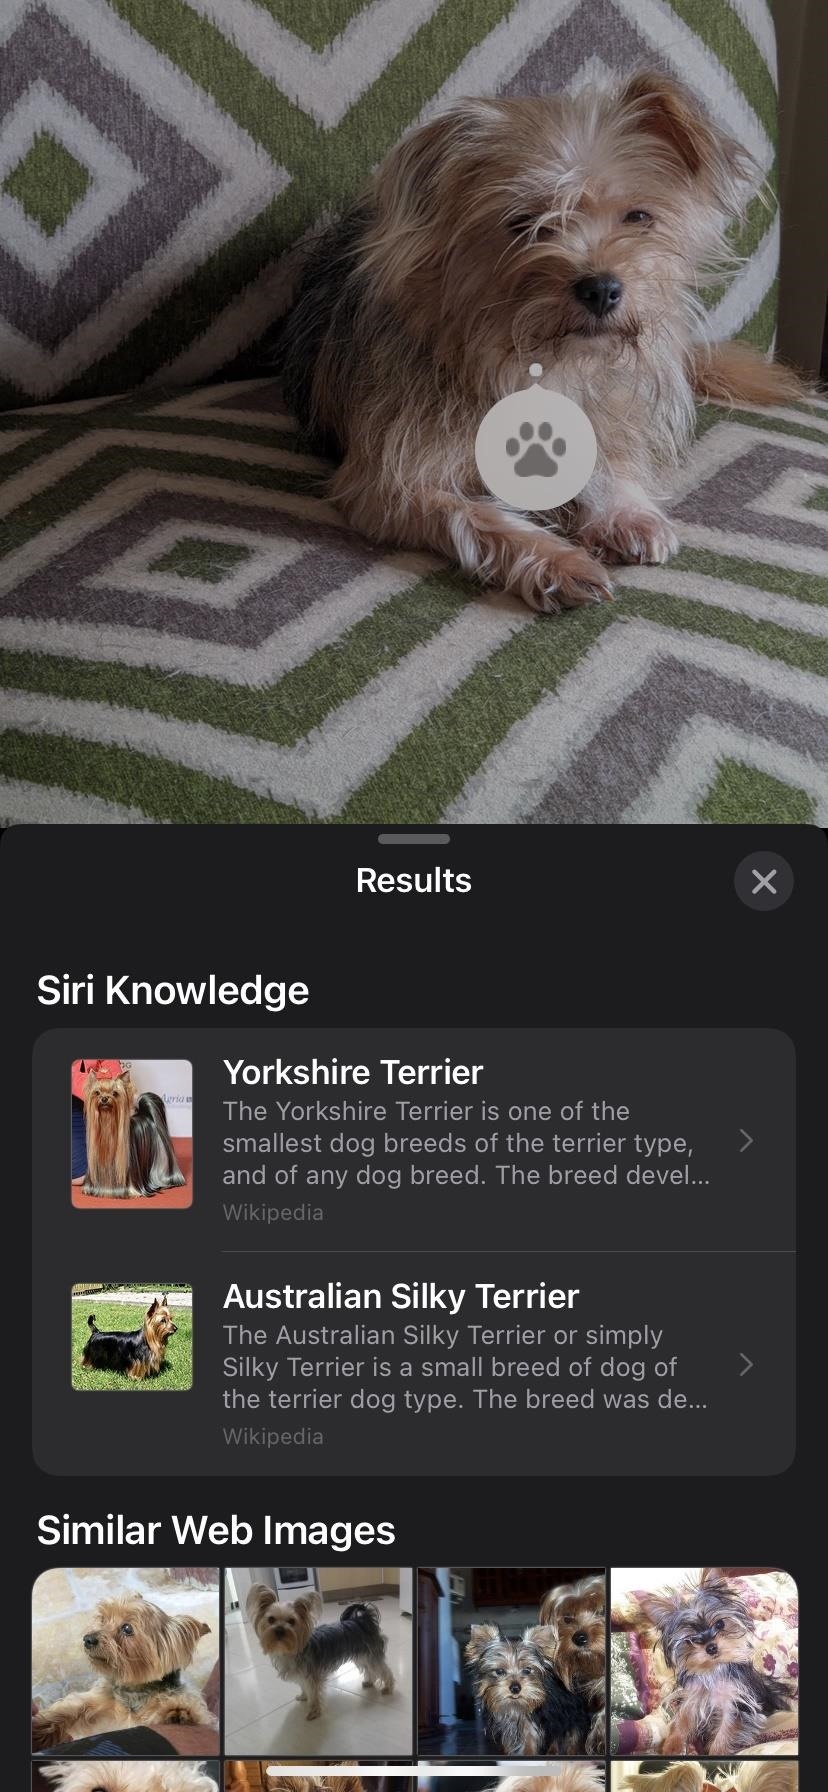 Use iOS 15's Live Text Feature to Scan Text in Photos and Online Images to Copy, Share, Translate, Look Up, and More